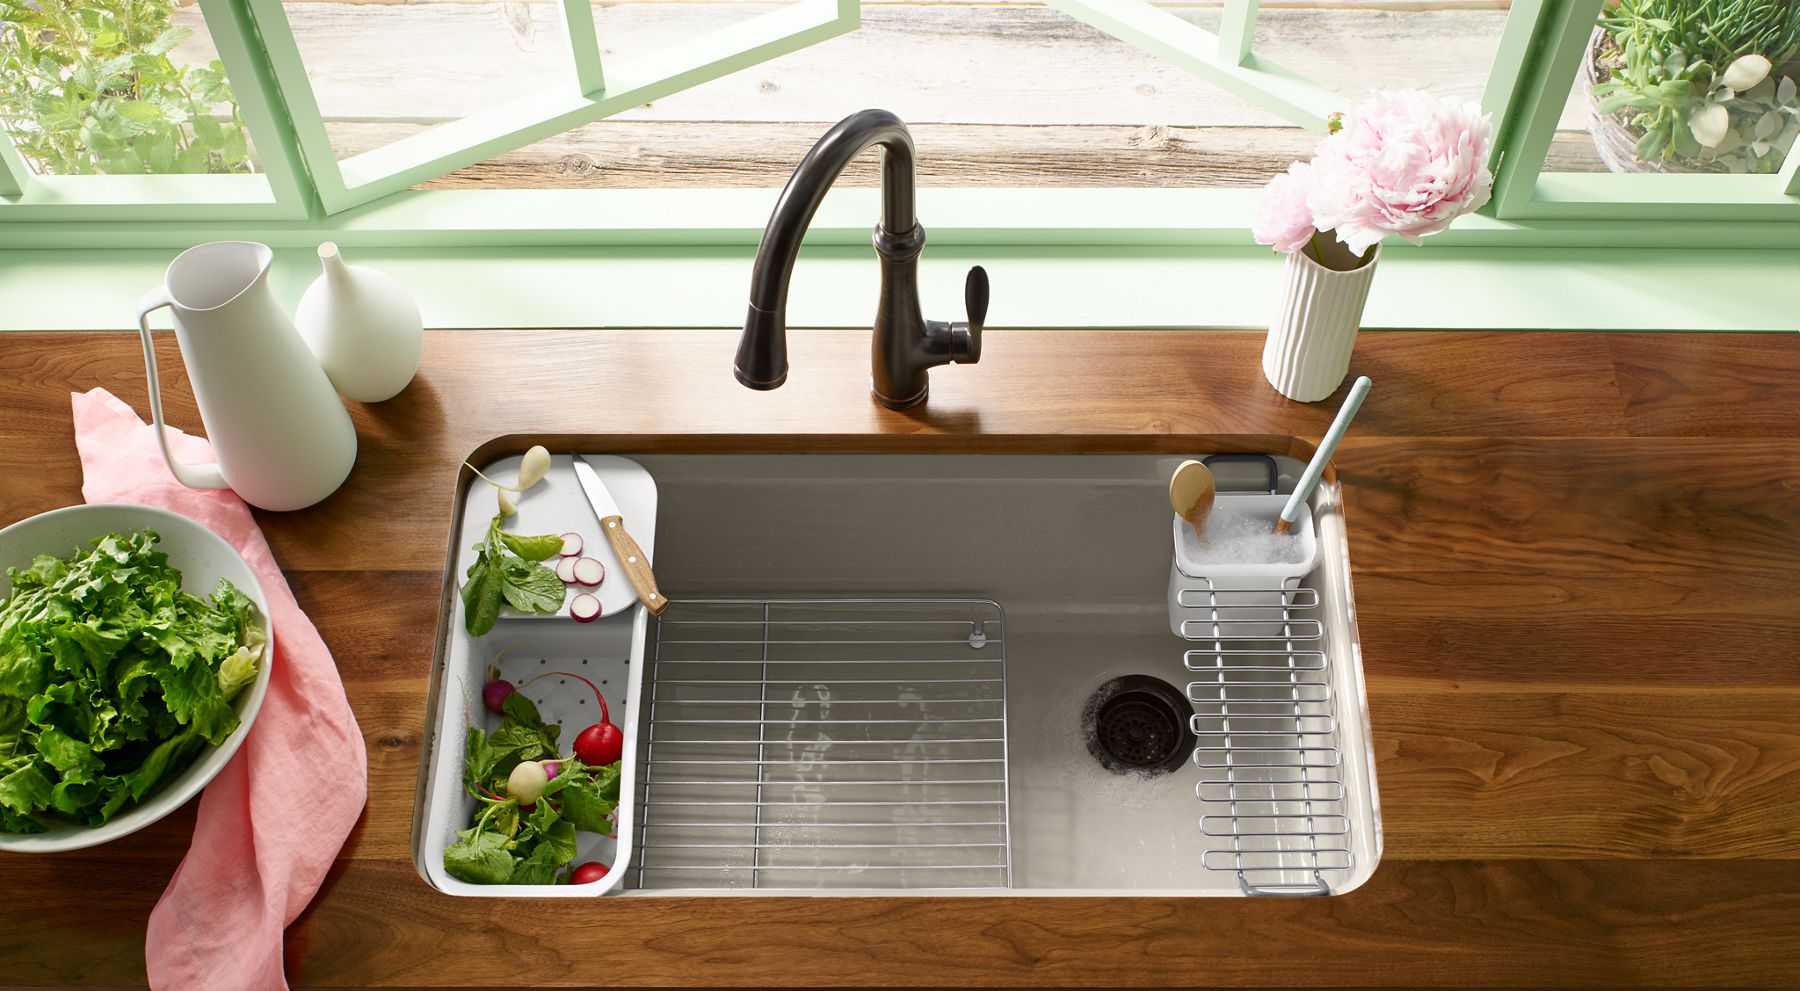 Additional Considerations For Your Kitchen Sink Kohler